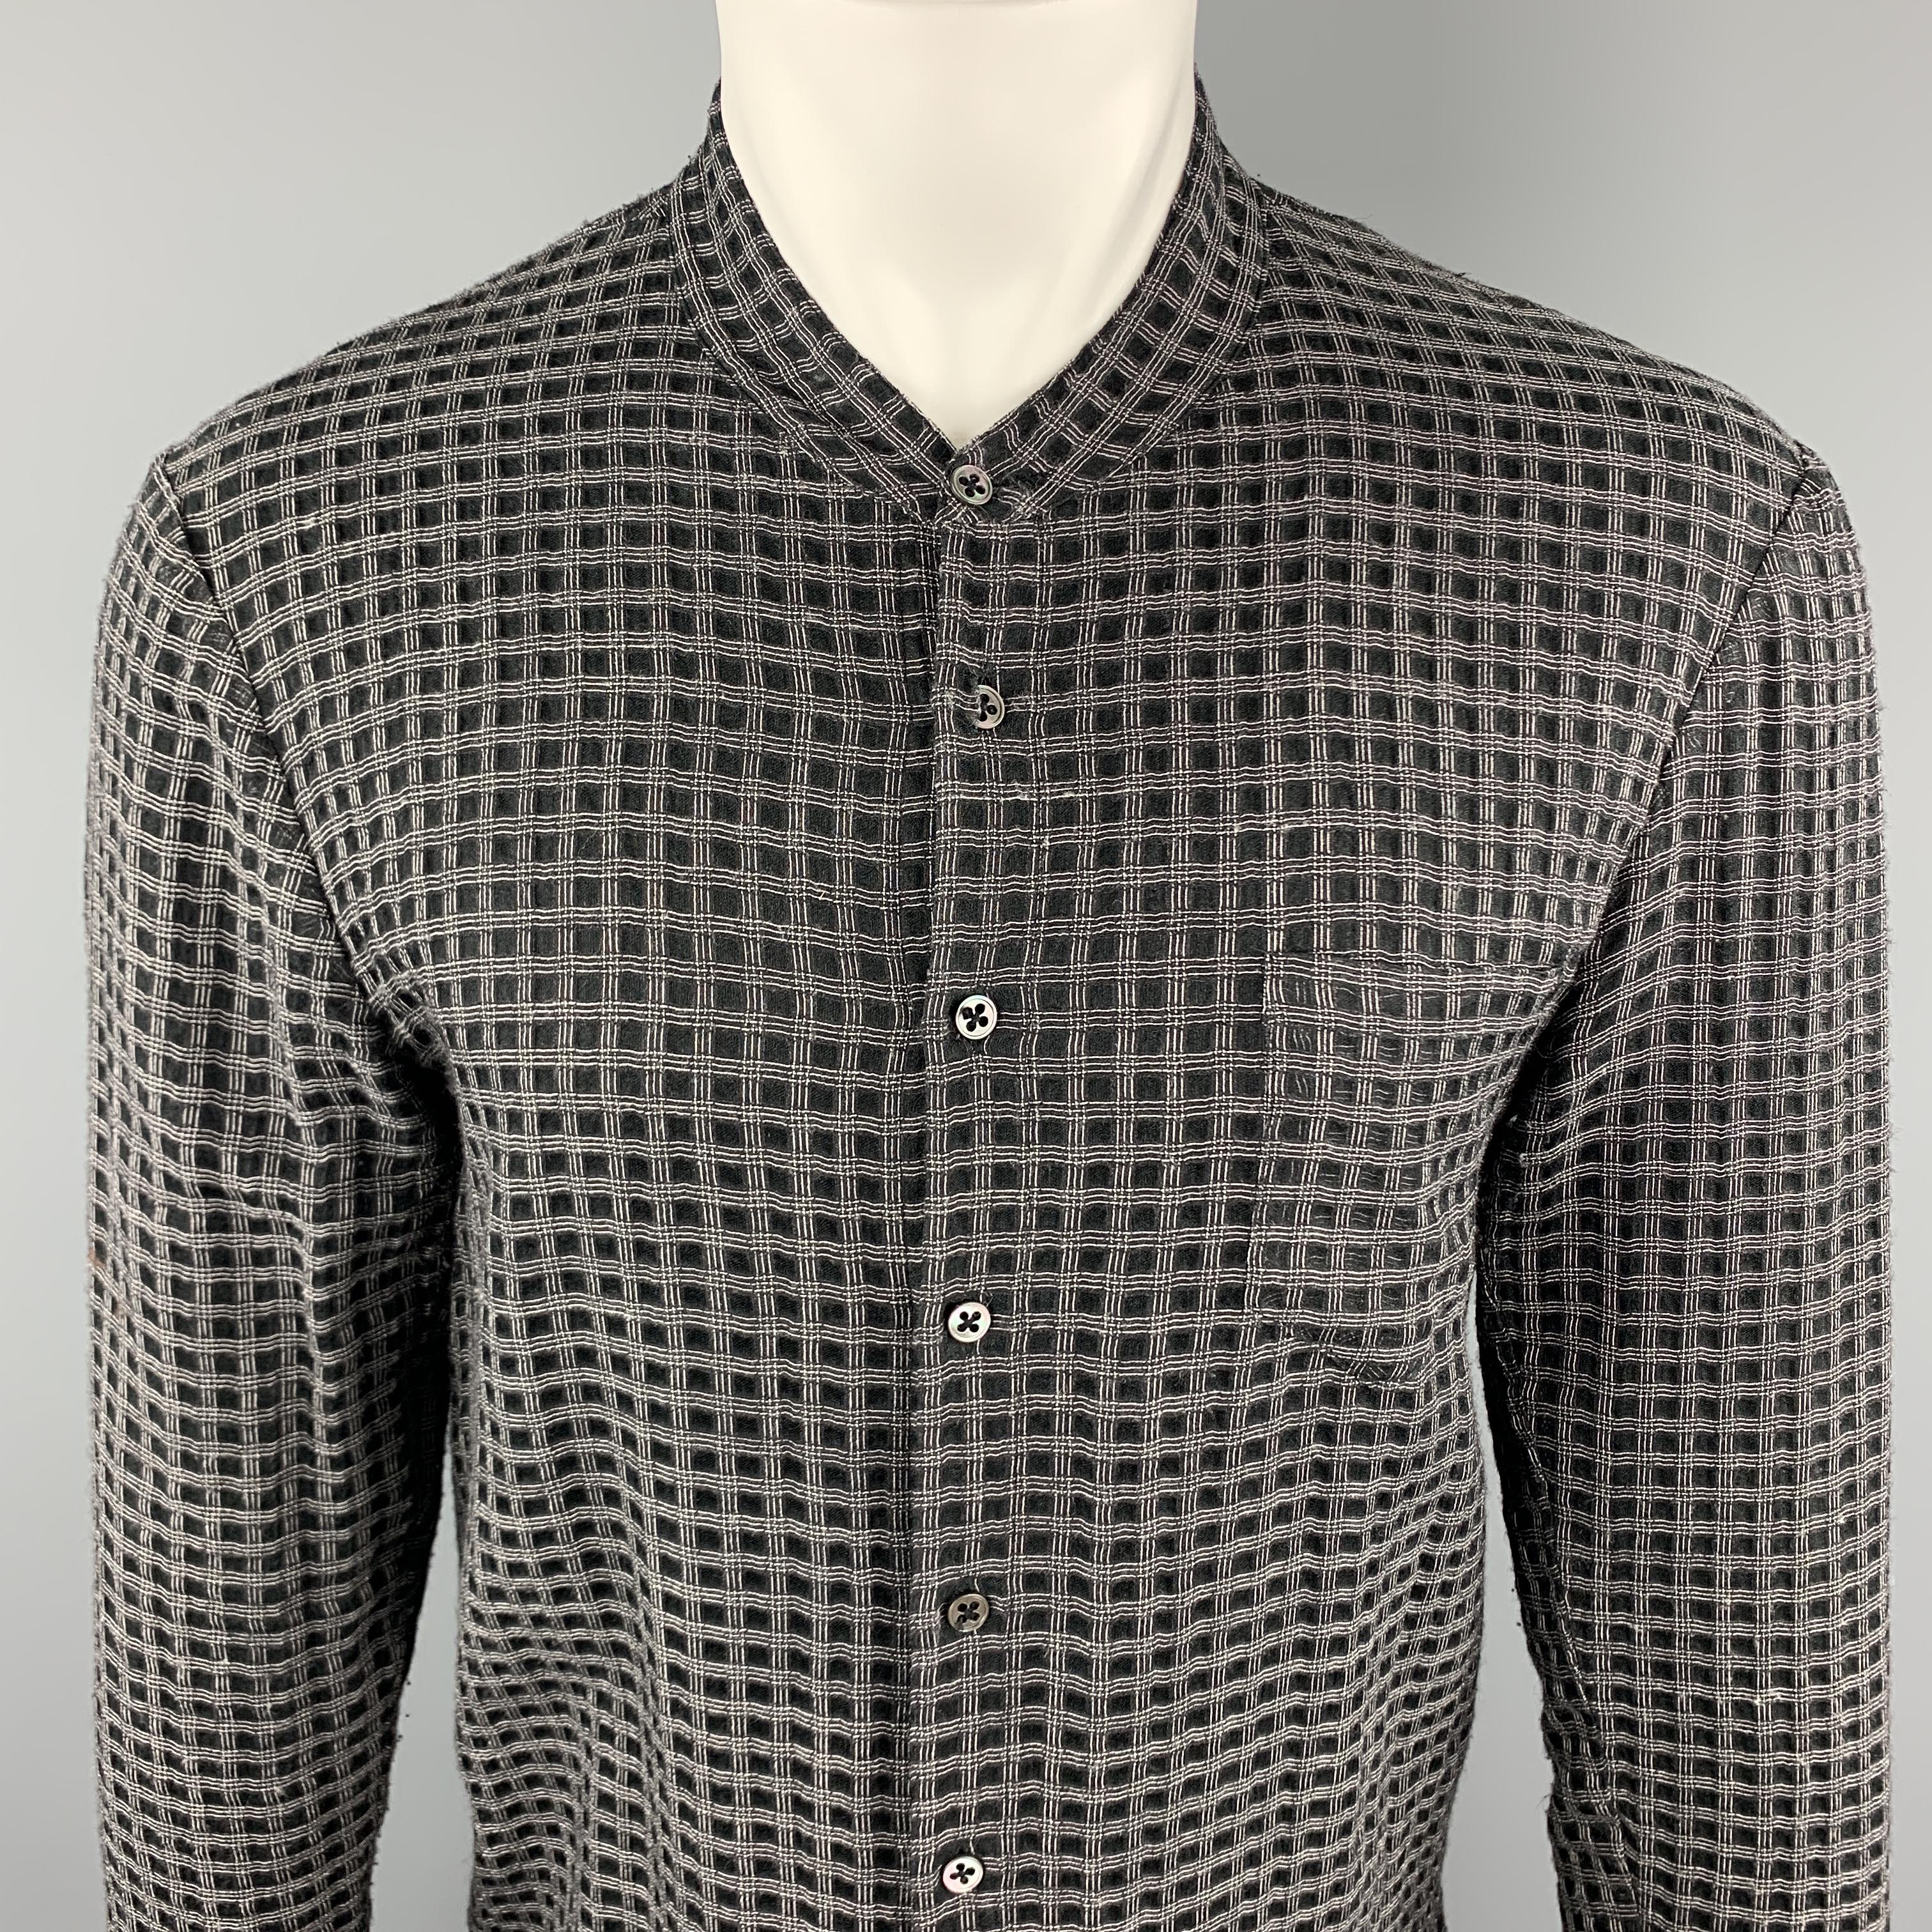 DAMIR DOMA Long Sleeve Shirt comes in black and grey window pane wool / silk material, with a nehru collar, a patch pocket, a buttoned front, buttoned cuffs, vent at sides, in a tunic style. Missing one button at right cuff. Made in Italy. 

Good